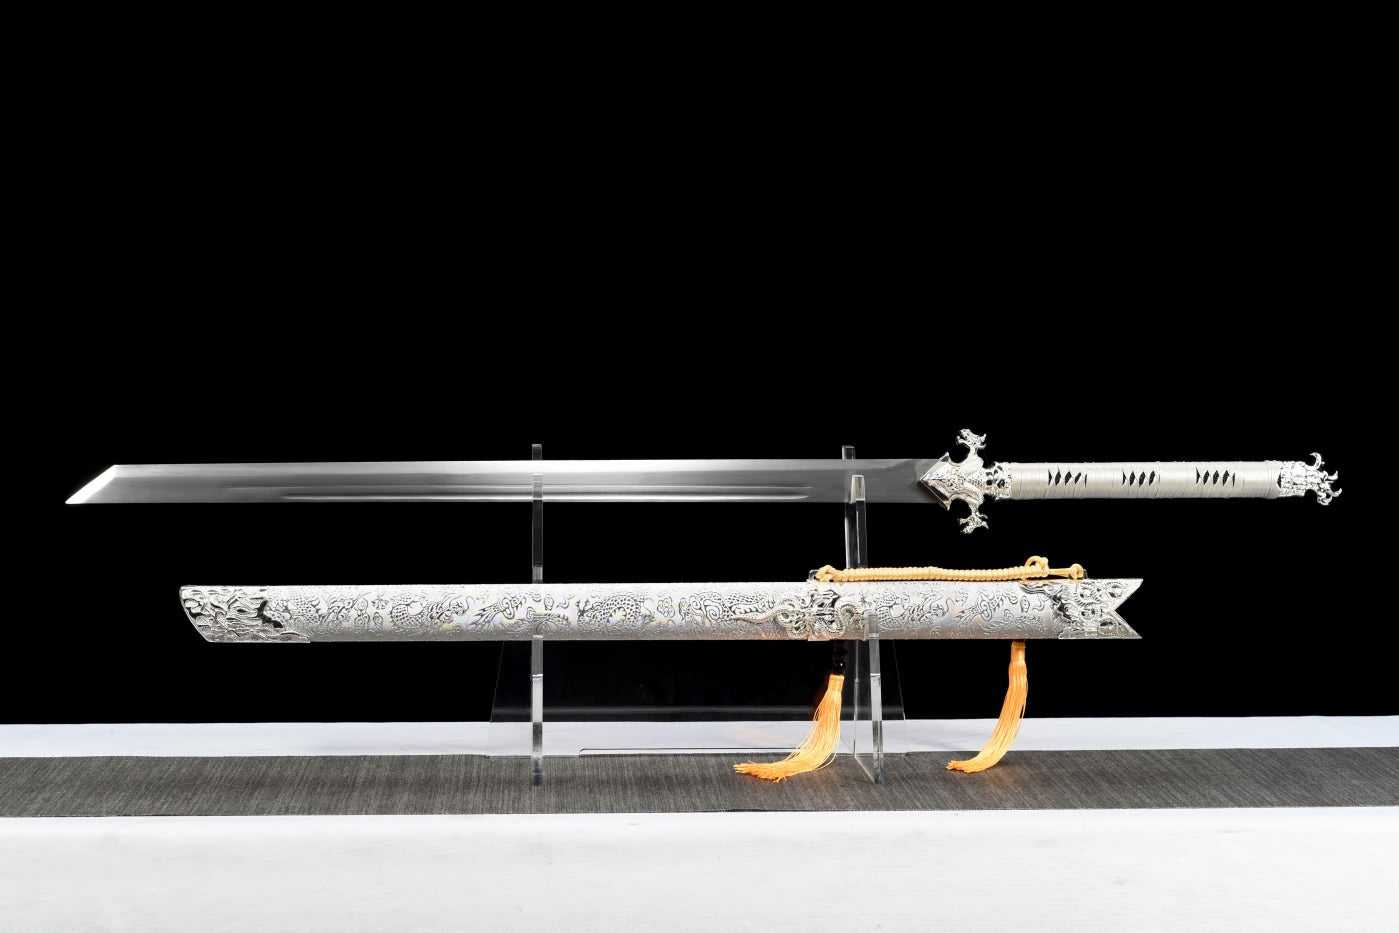 War Dragon dao Sword Real,High Carbon Steel Blade,Silver Leather Scabbard,LOONGSWORD